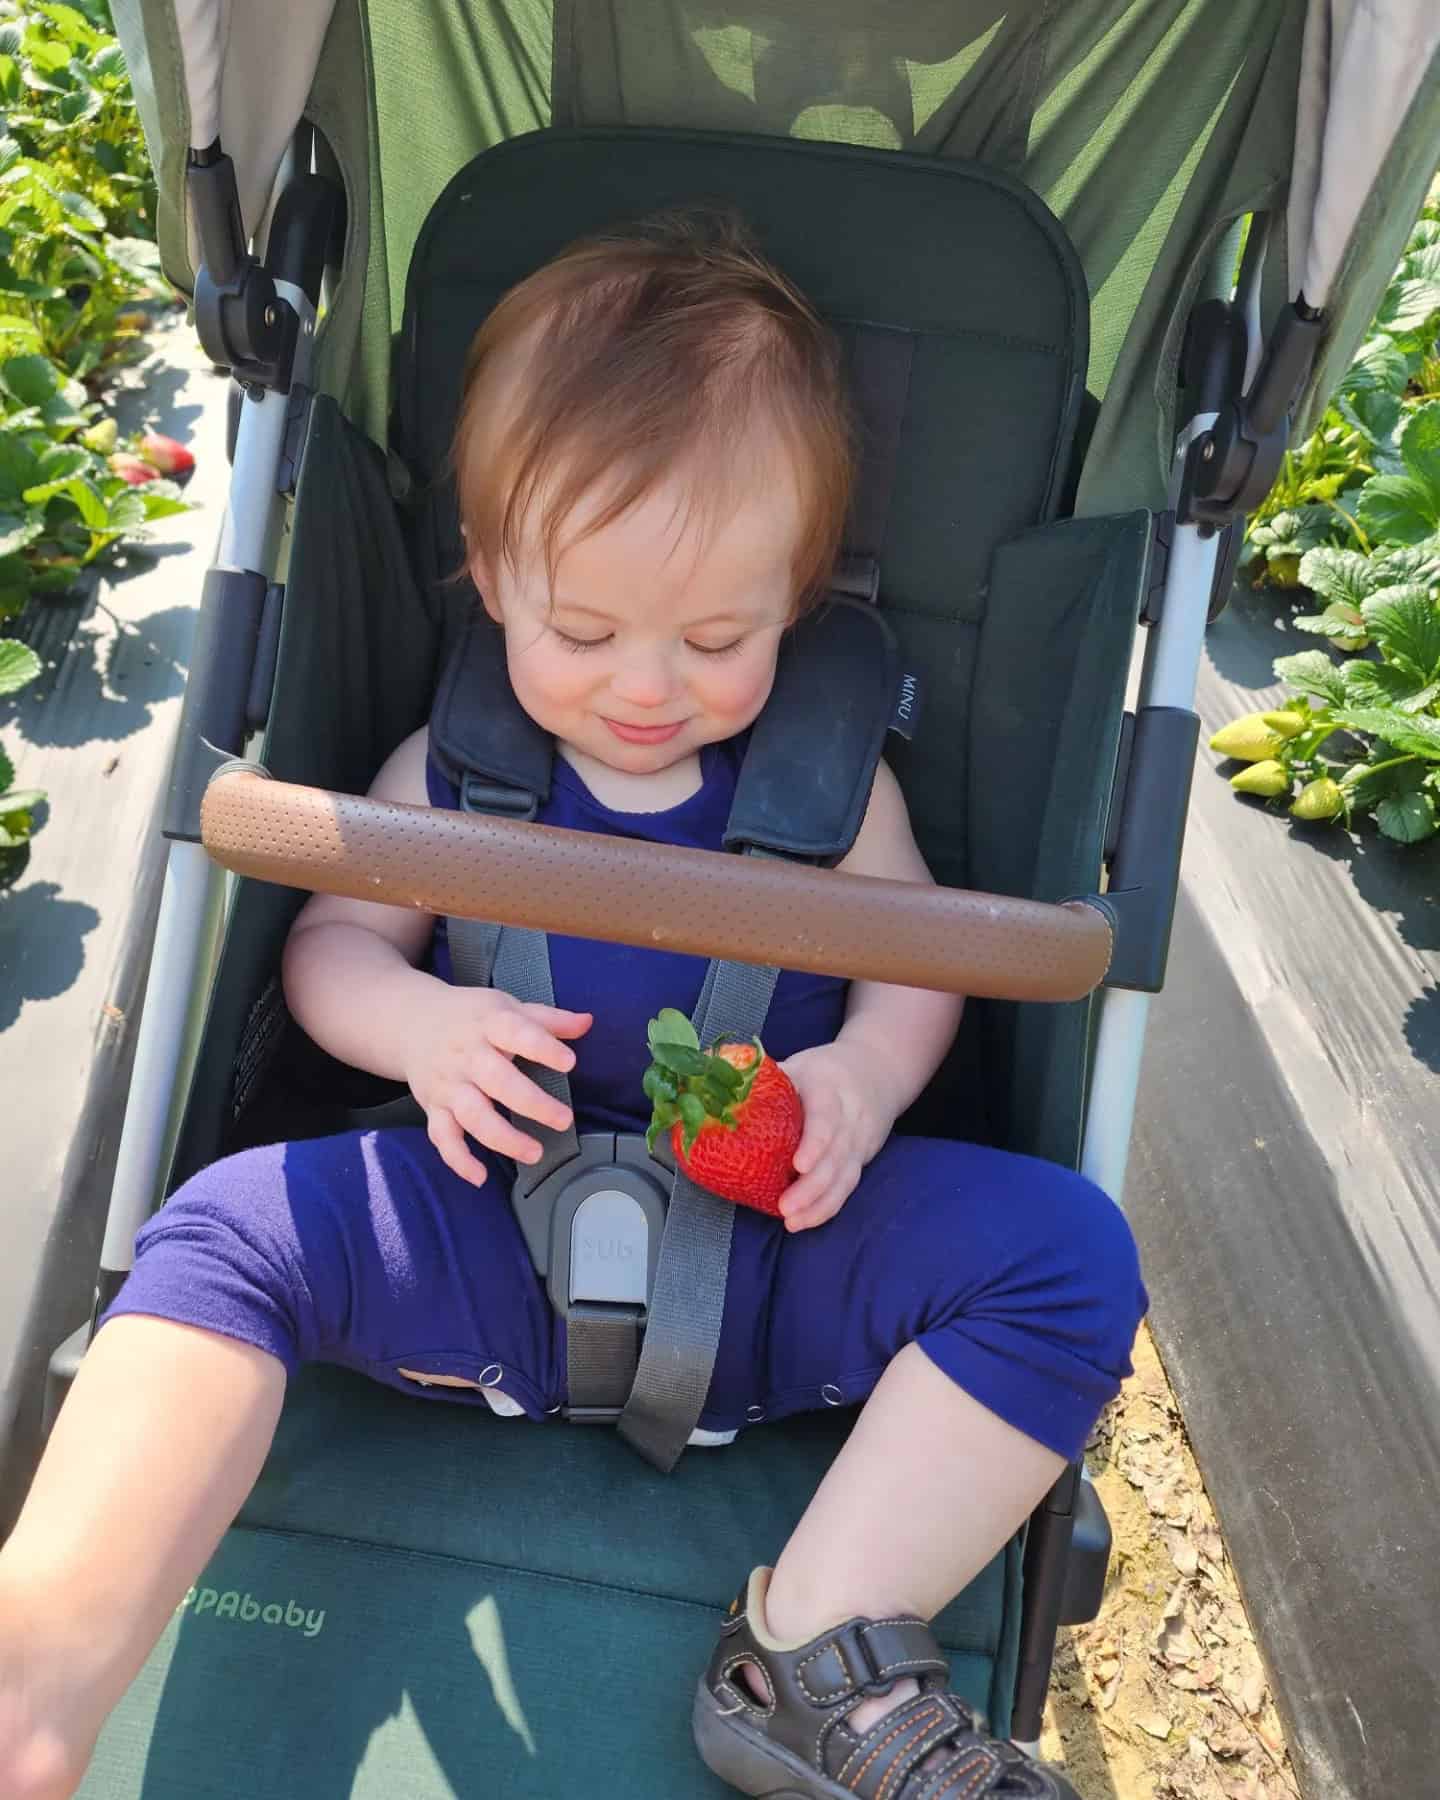 a young toddler boy sits in a green stroller while peering down at a ripe red strawberry held in his hand